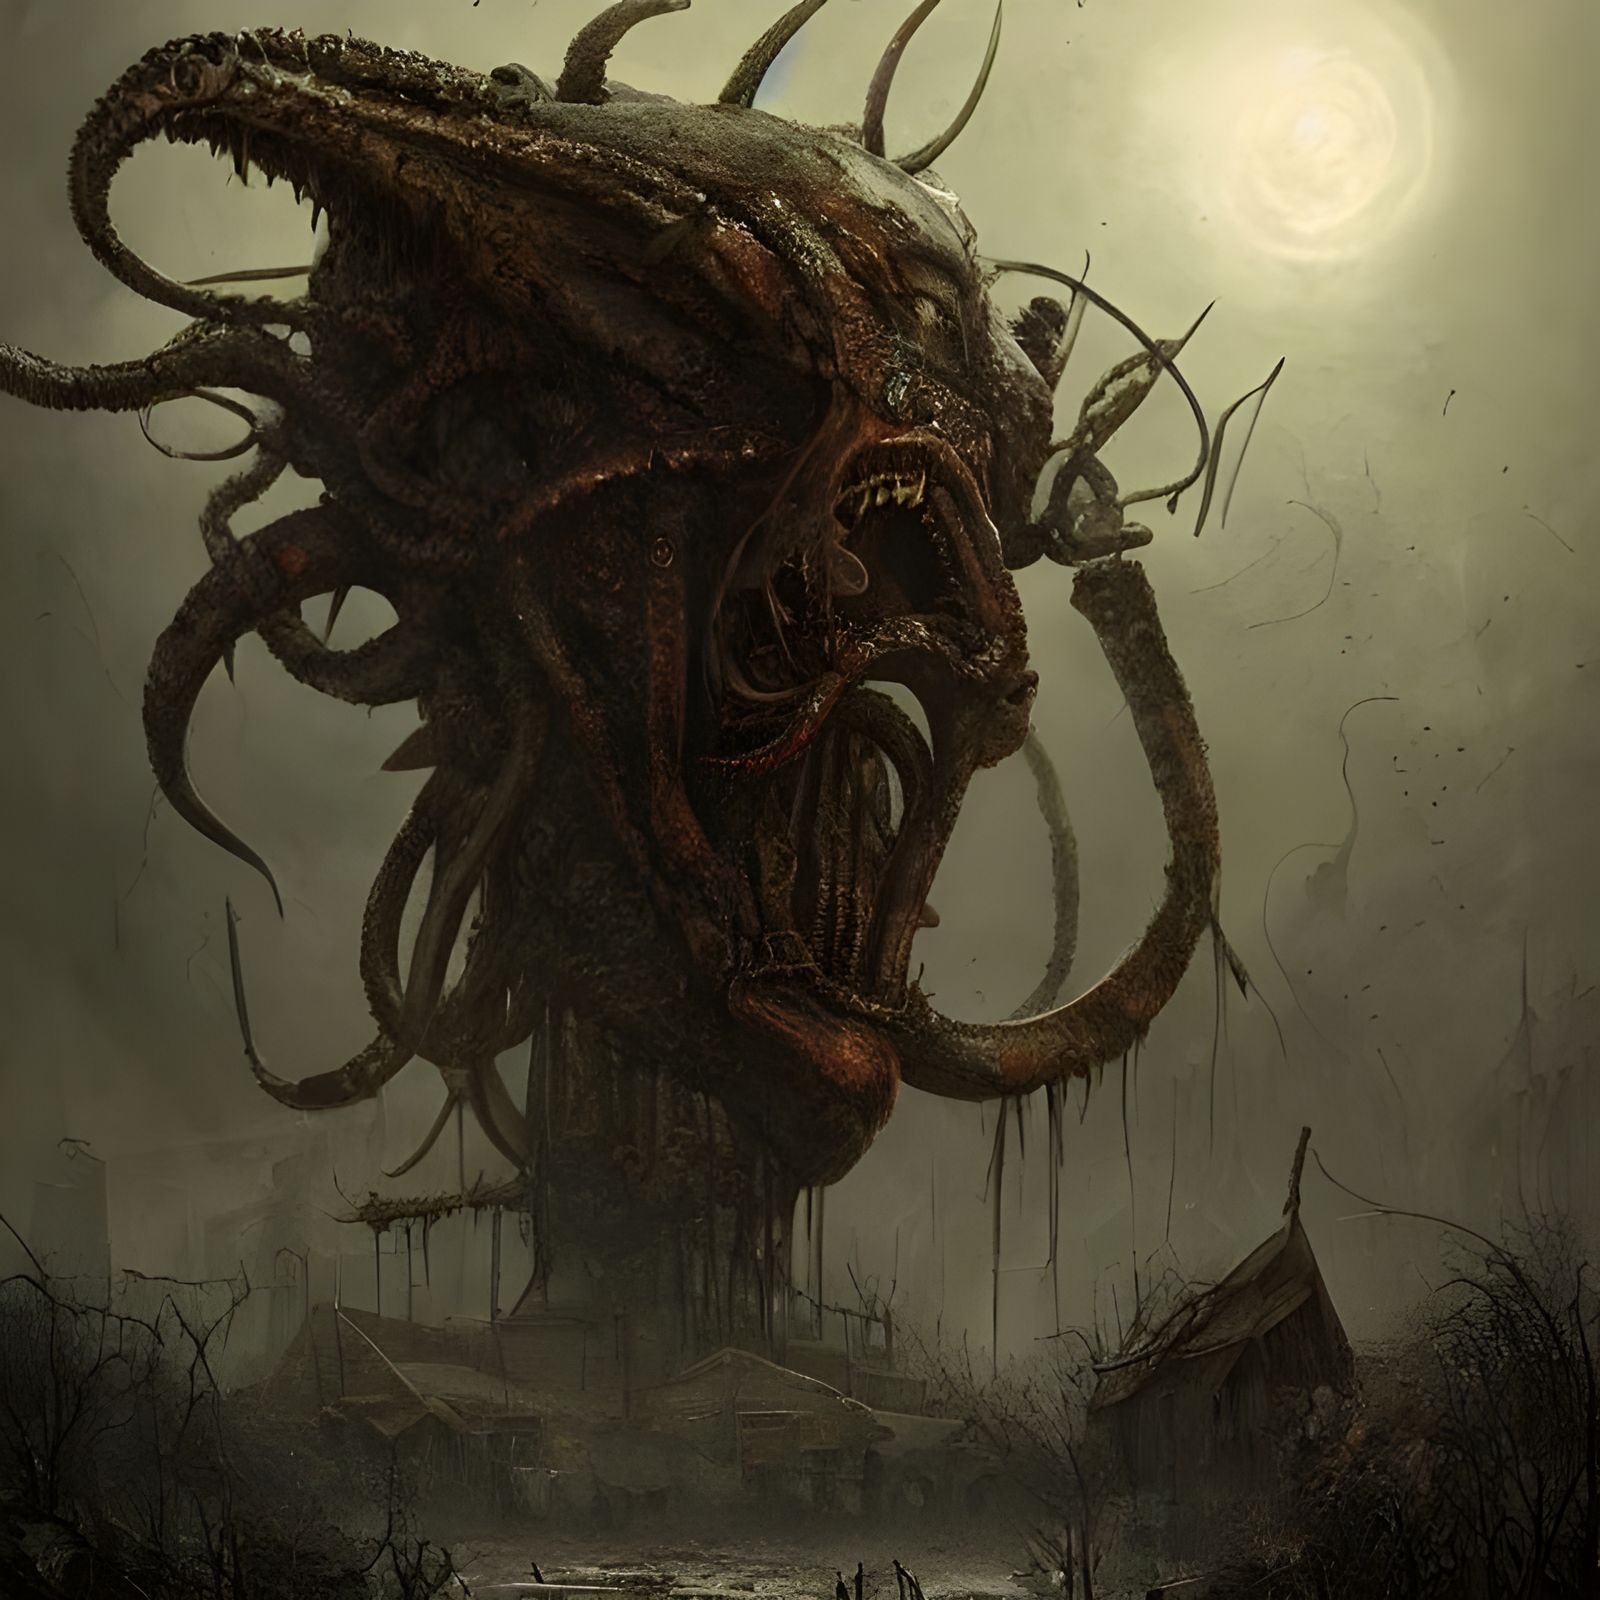 Post-Apocalyptic World Ruined by a H P Lovcraft Elder God